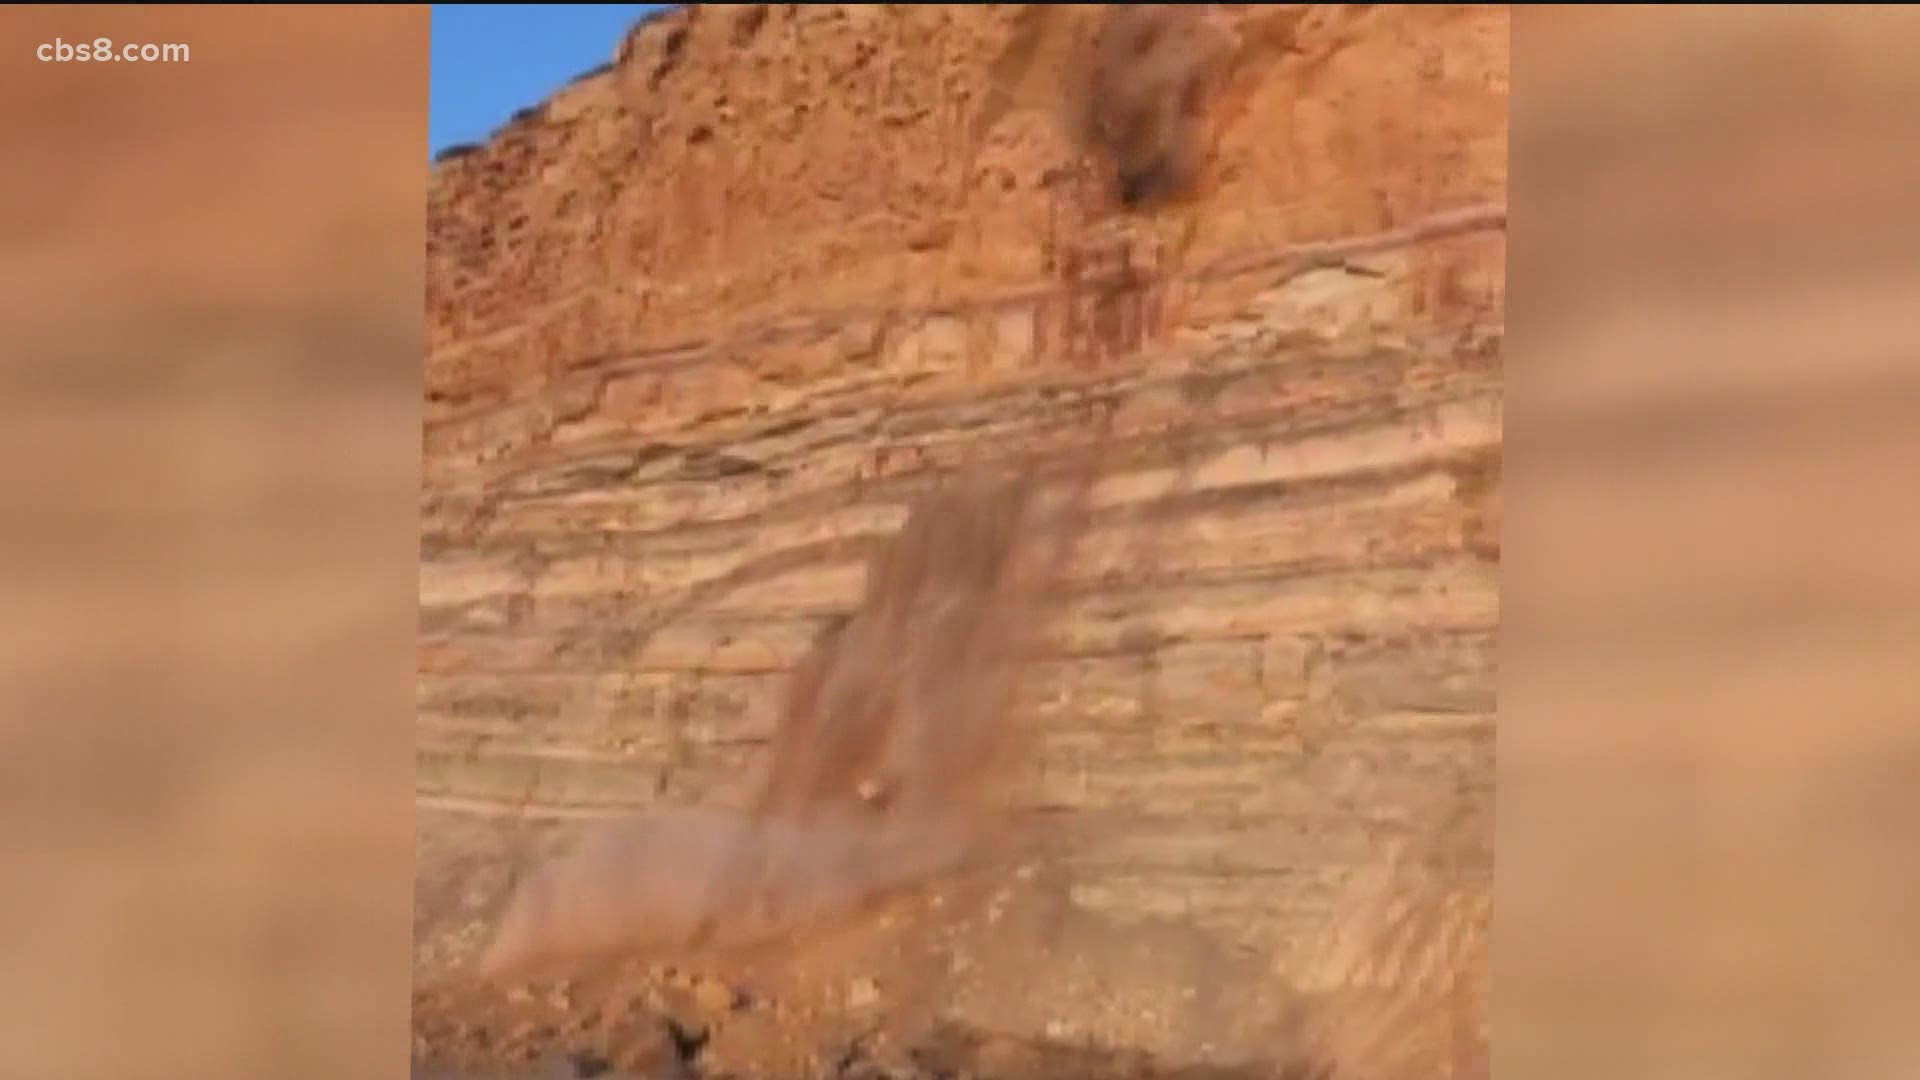 A warning after a bluff collapse in Torrey Pines causes panic that more could come down. No one was injured but video shows the huge chunk crashing down near people.